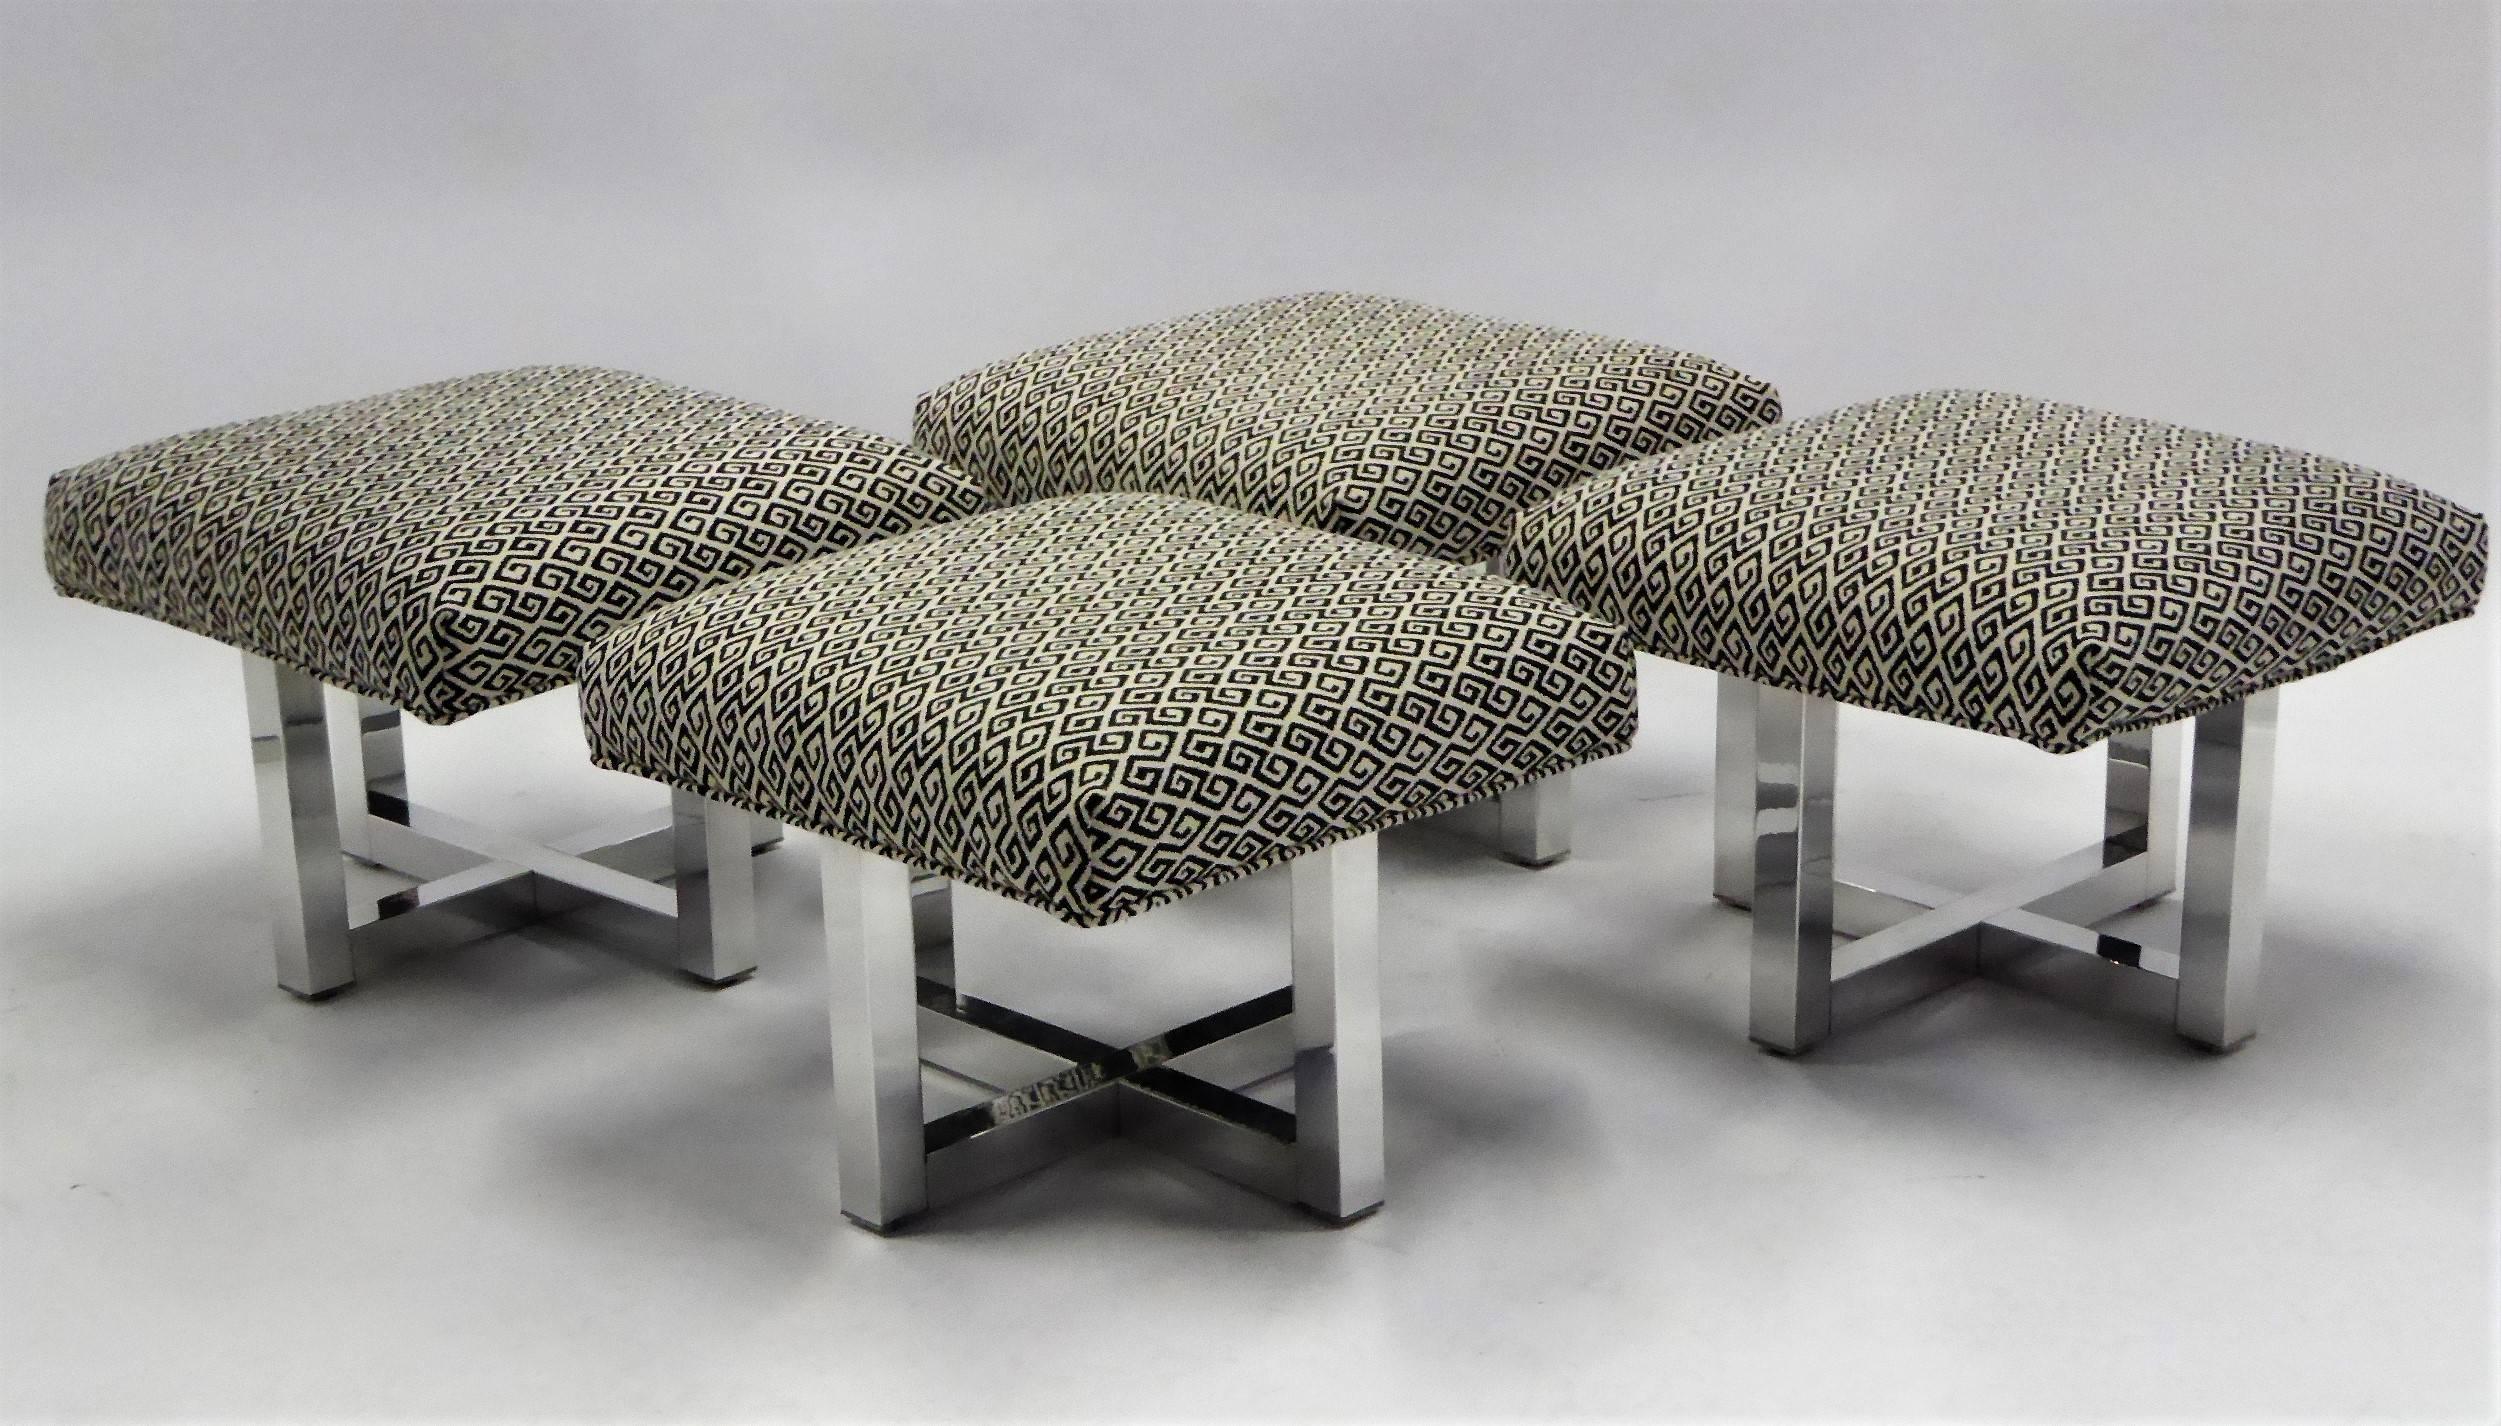 Upholstery Milo Baughman Style Bench Stools Polished Aluminum Upholstered 2 pairs available